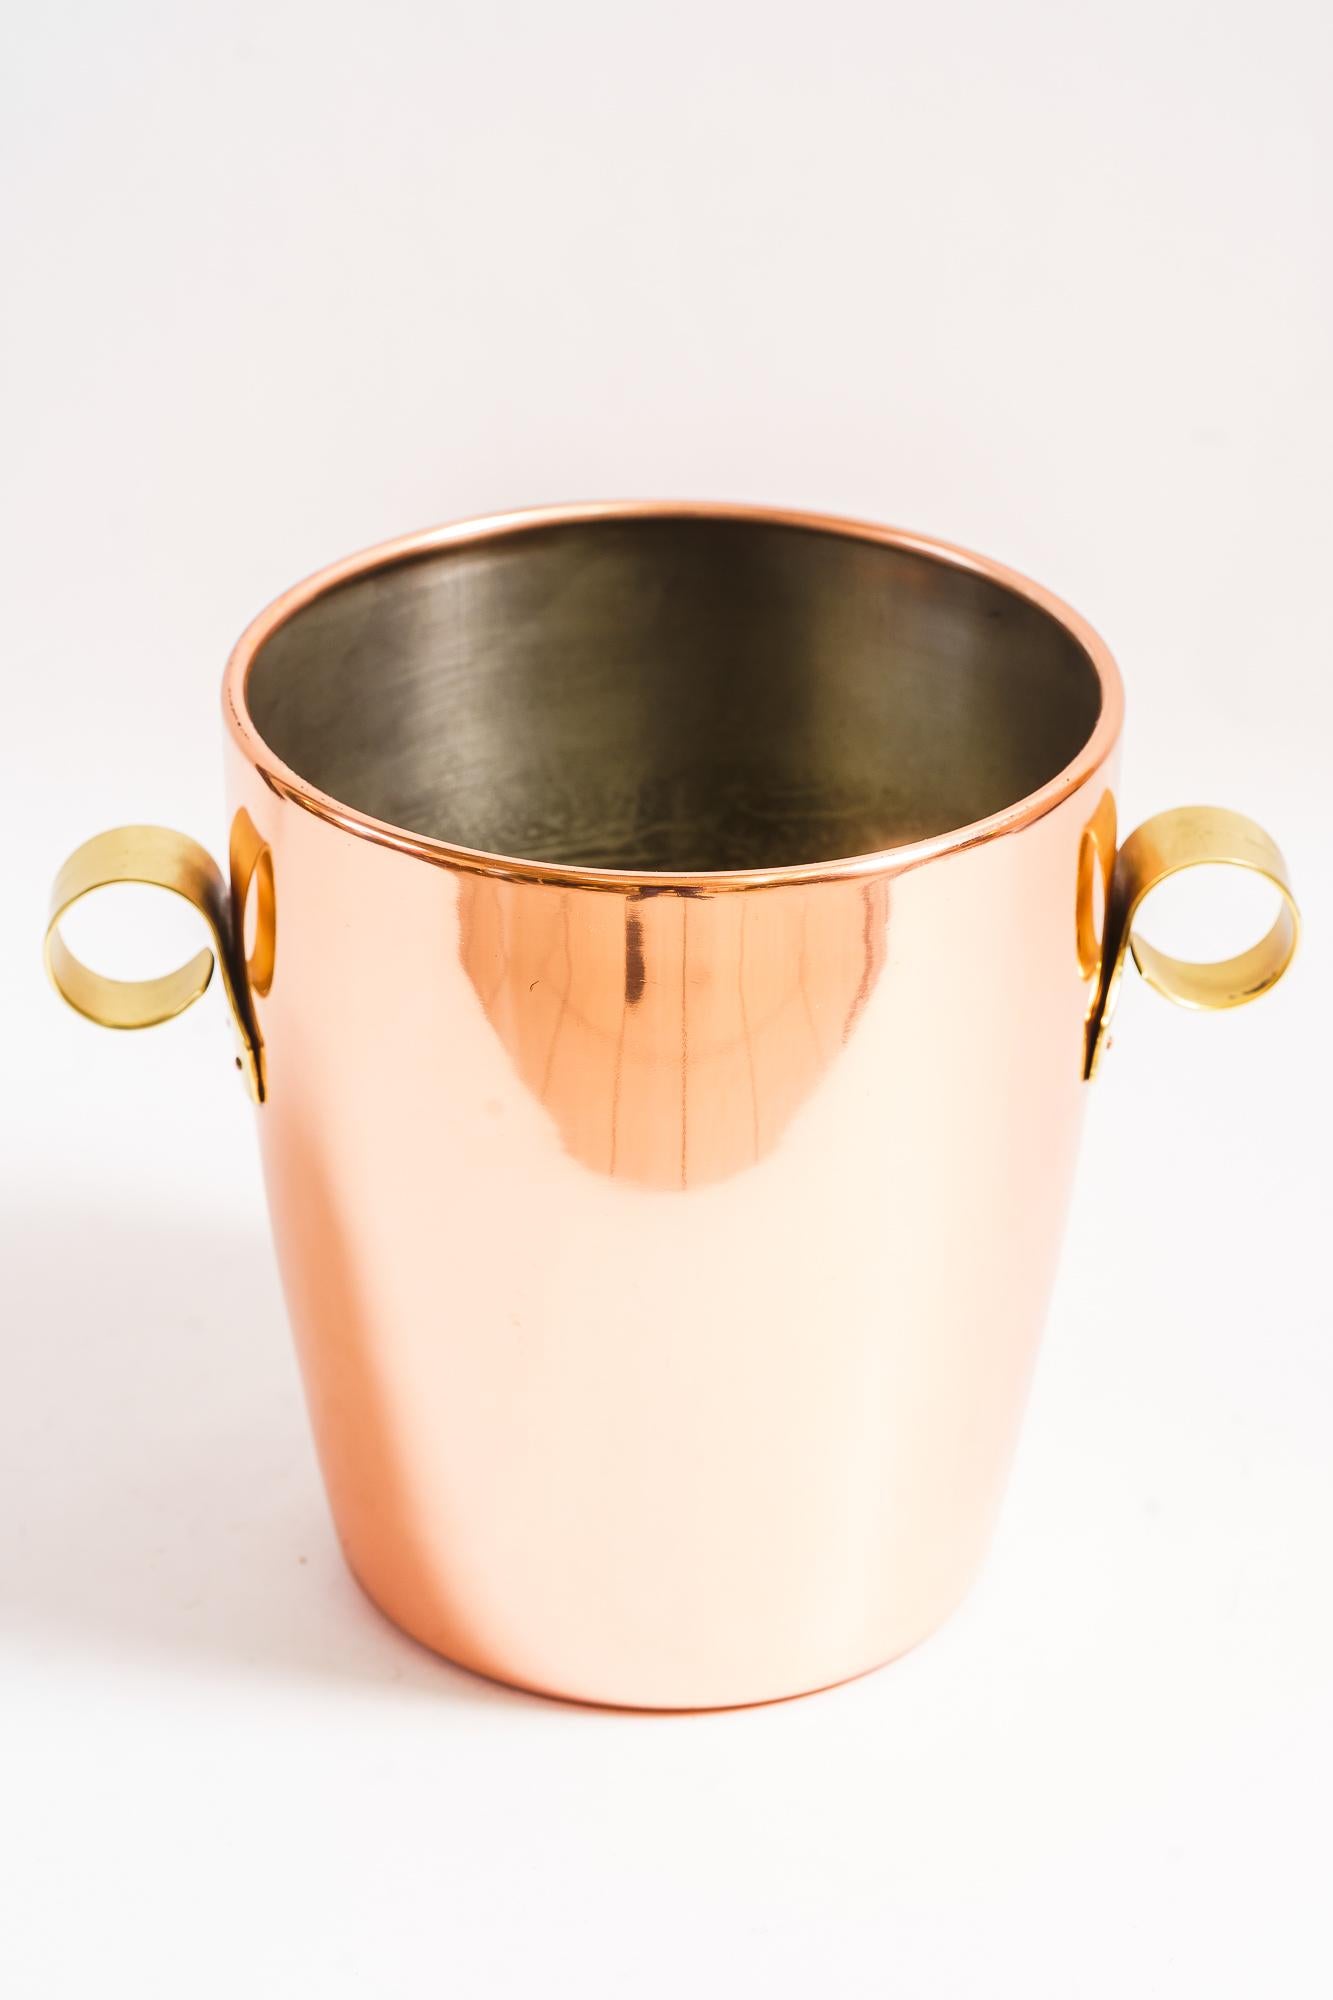 Copper Champagne Bucket vienna around 1950s
Only Polished